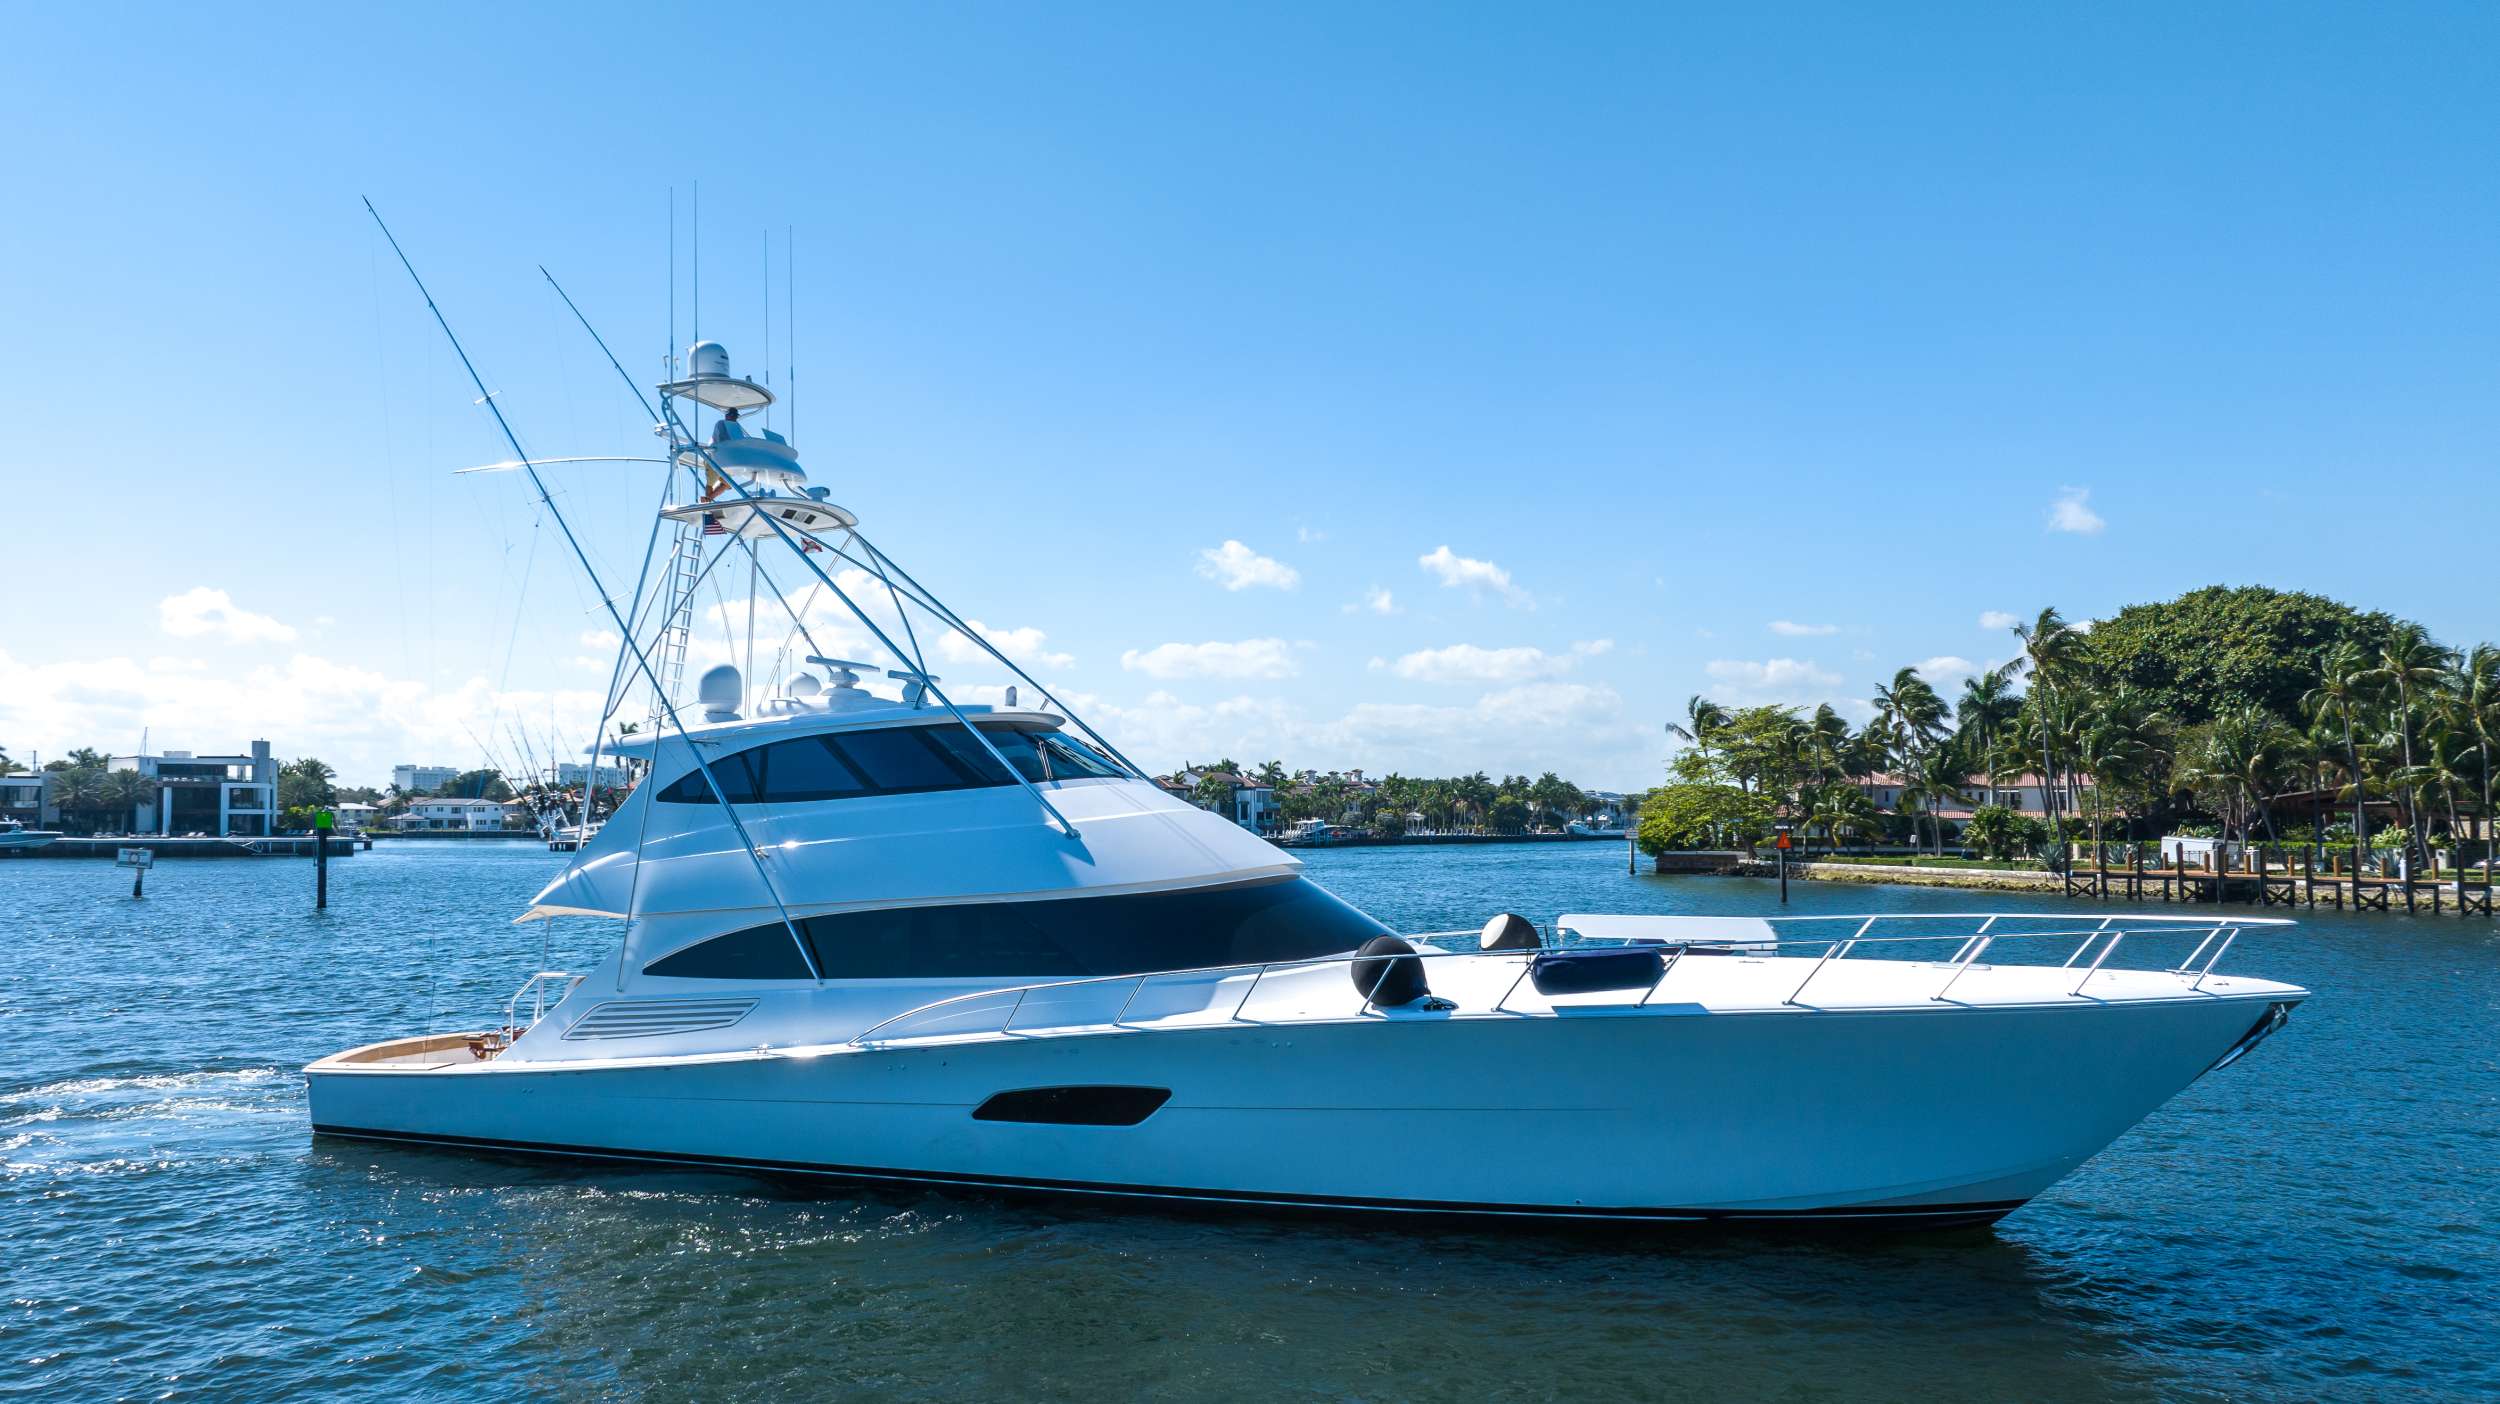 Astrikos - Yacht Charter Fort Lauderdale & Boat hire in Florida & Bahamas 1